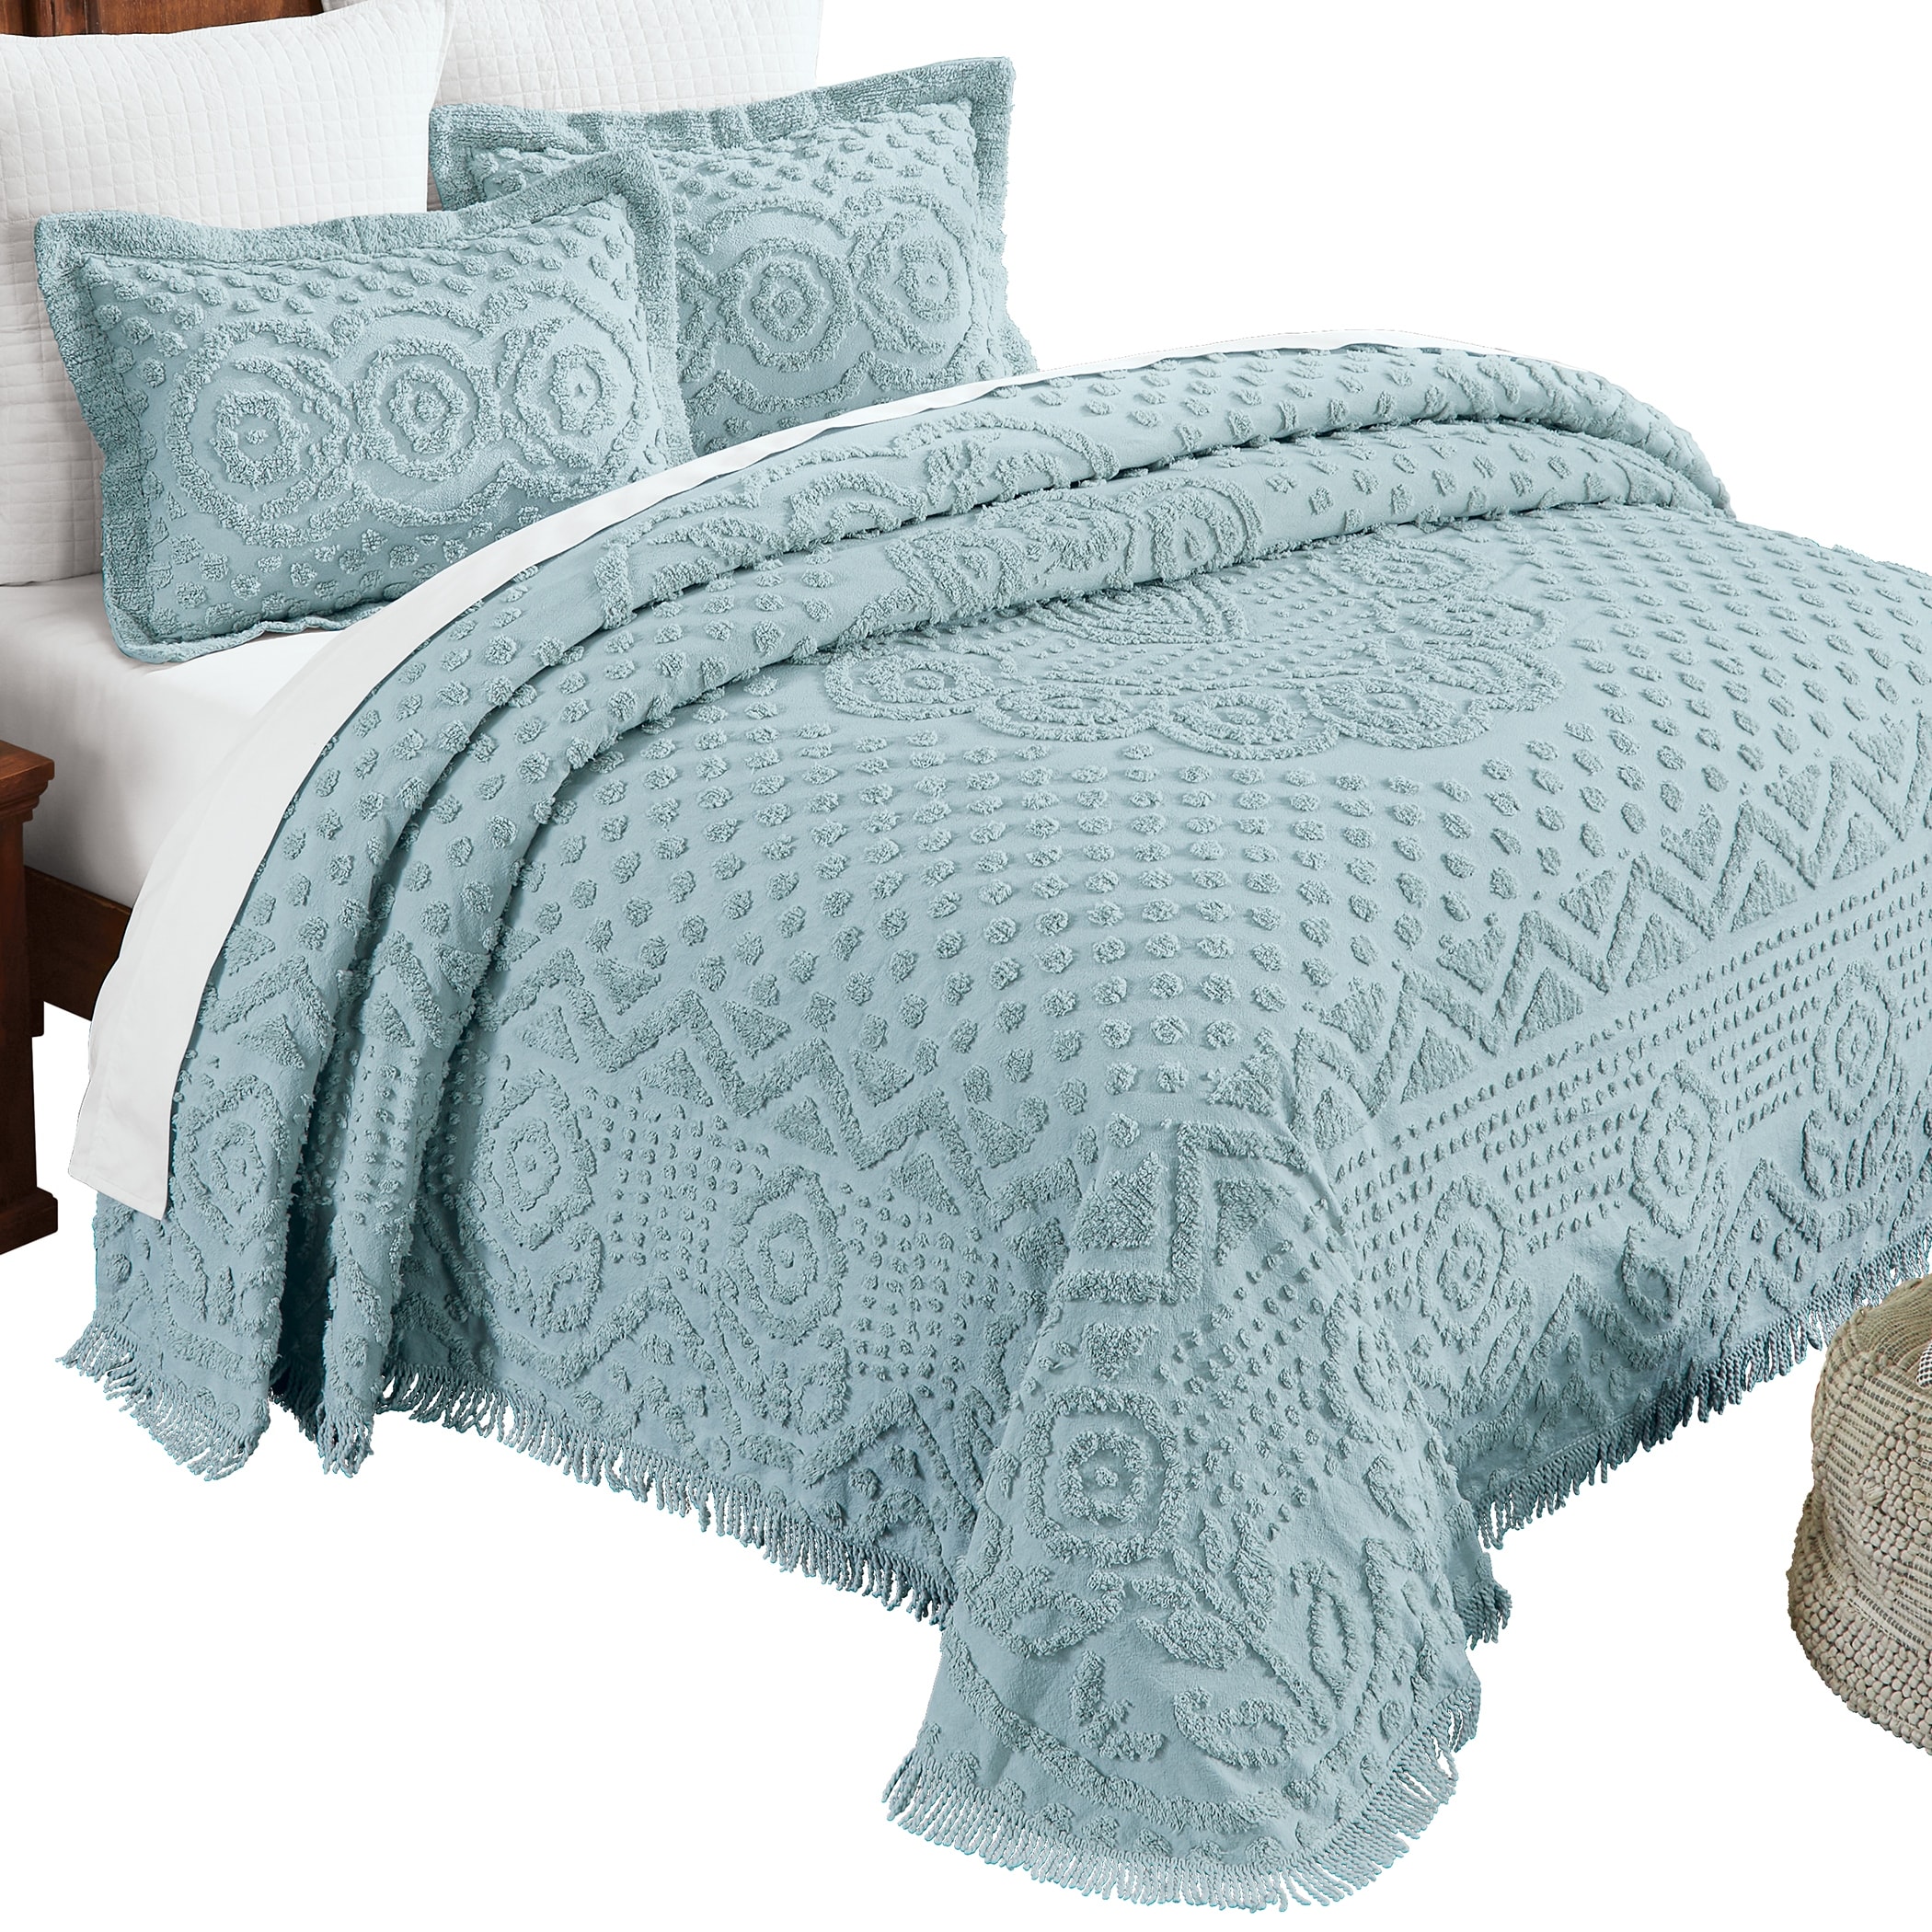  Better Trends Ashton Collection 100% Cotton Chenille Bedspread  Medallion Design King Size Floral Design Bed Cover in Sage - Tufted Cotton  Bedspreads, Lightweight Bedspread & Coverlets : Home & Kitchen